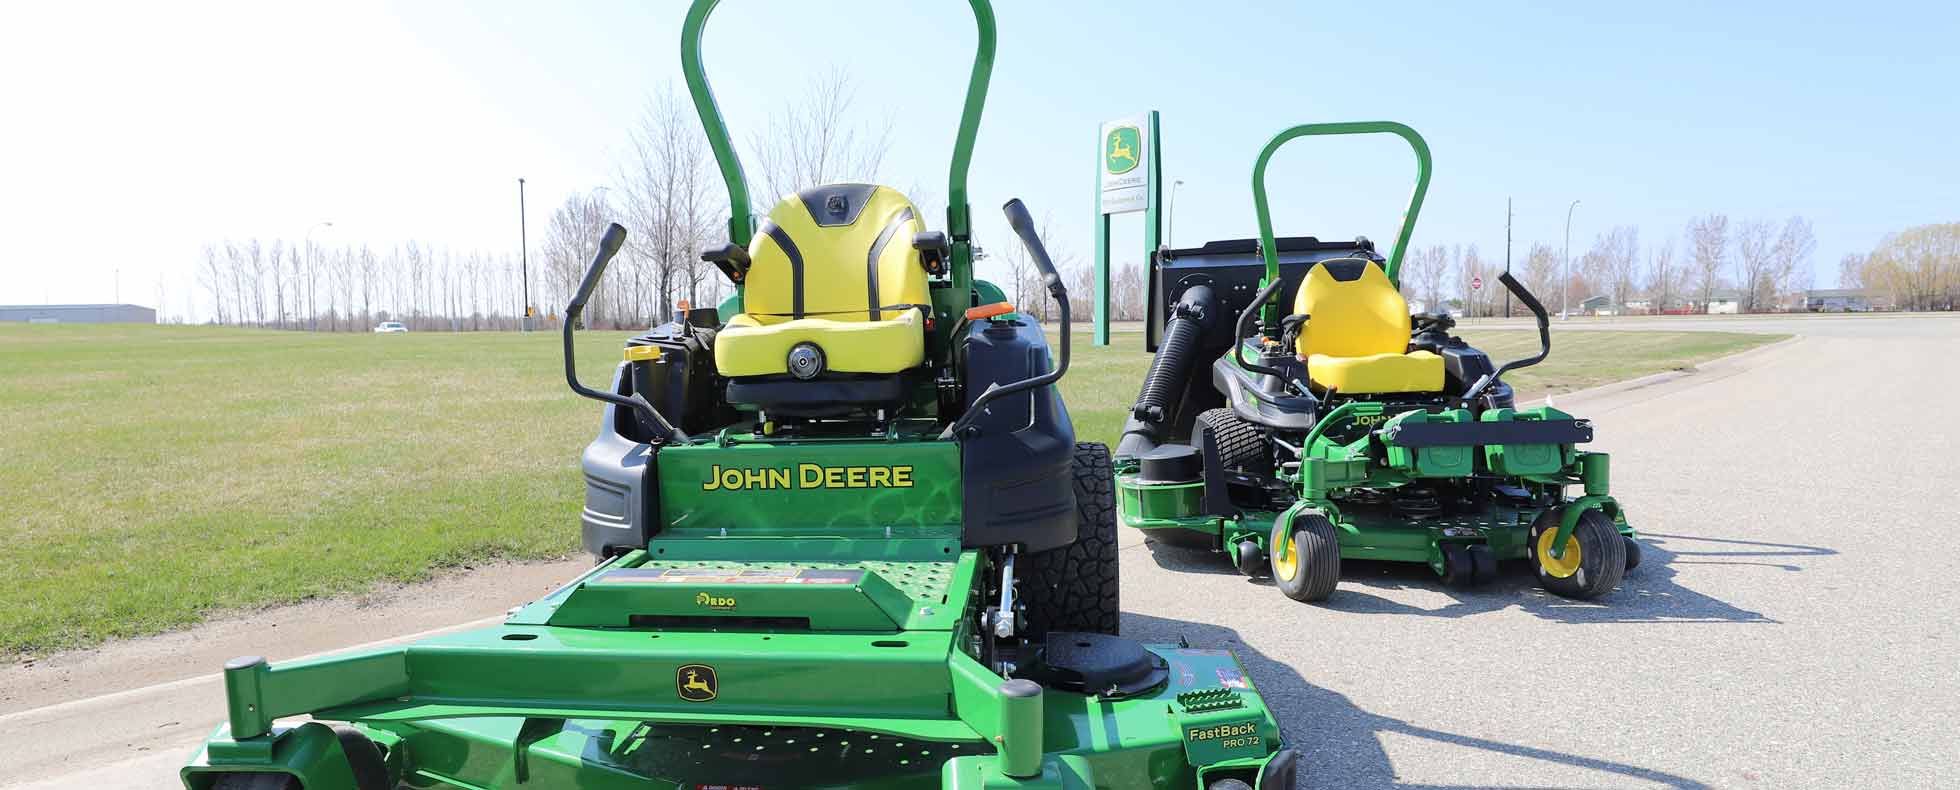 5 Tips for Preventative Maintenance Exclusive to Zero-Turn Mowers